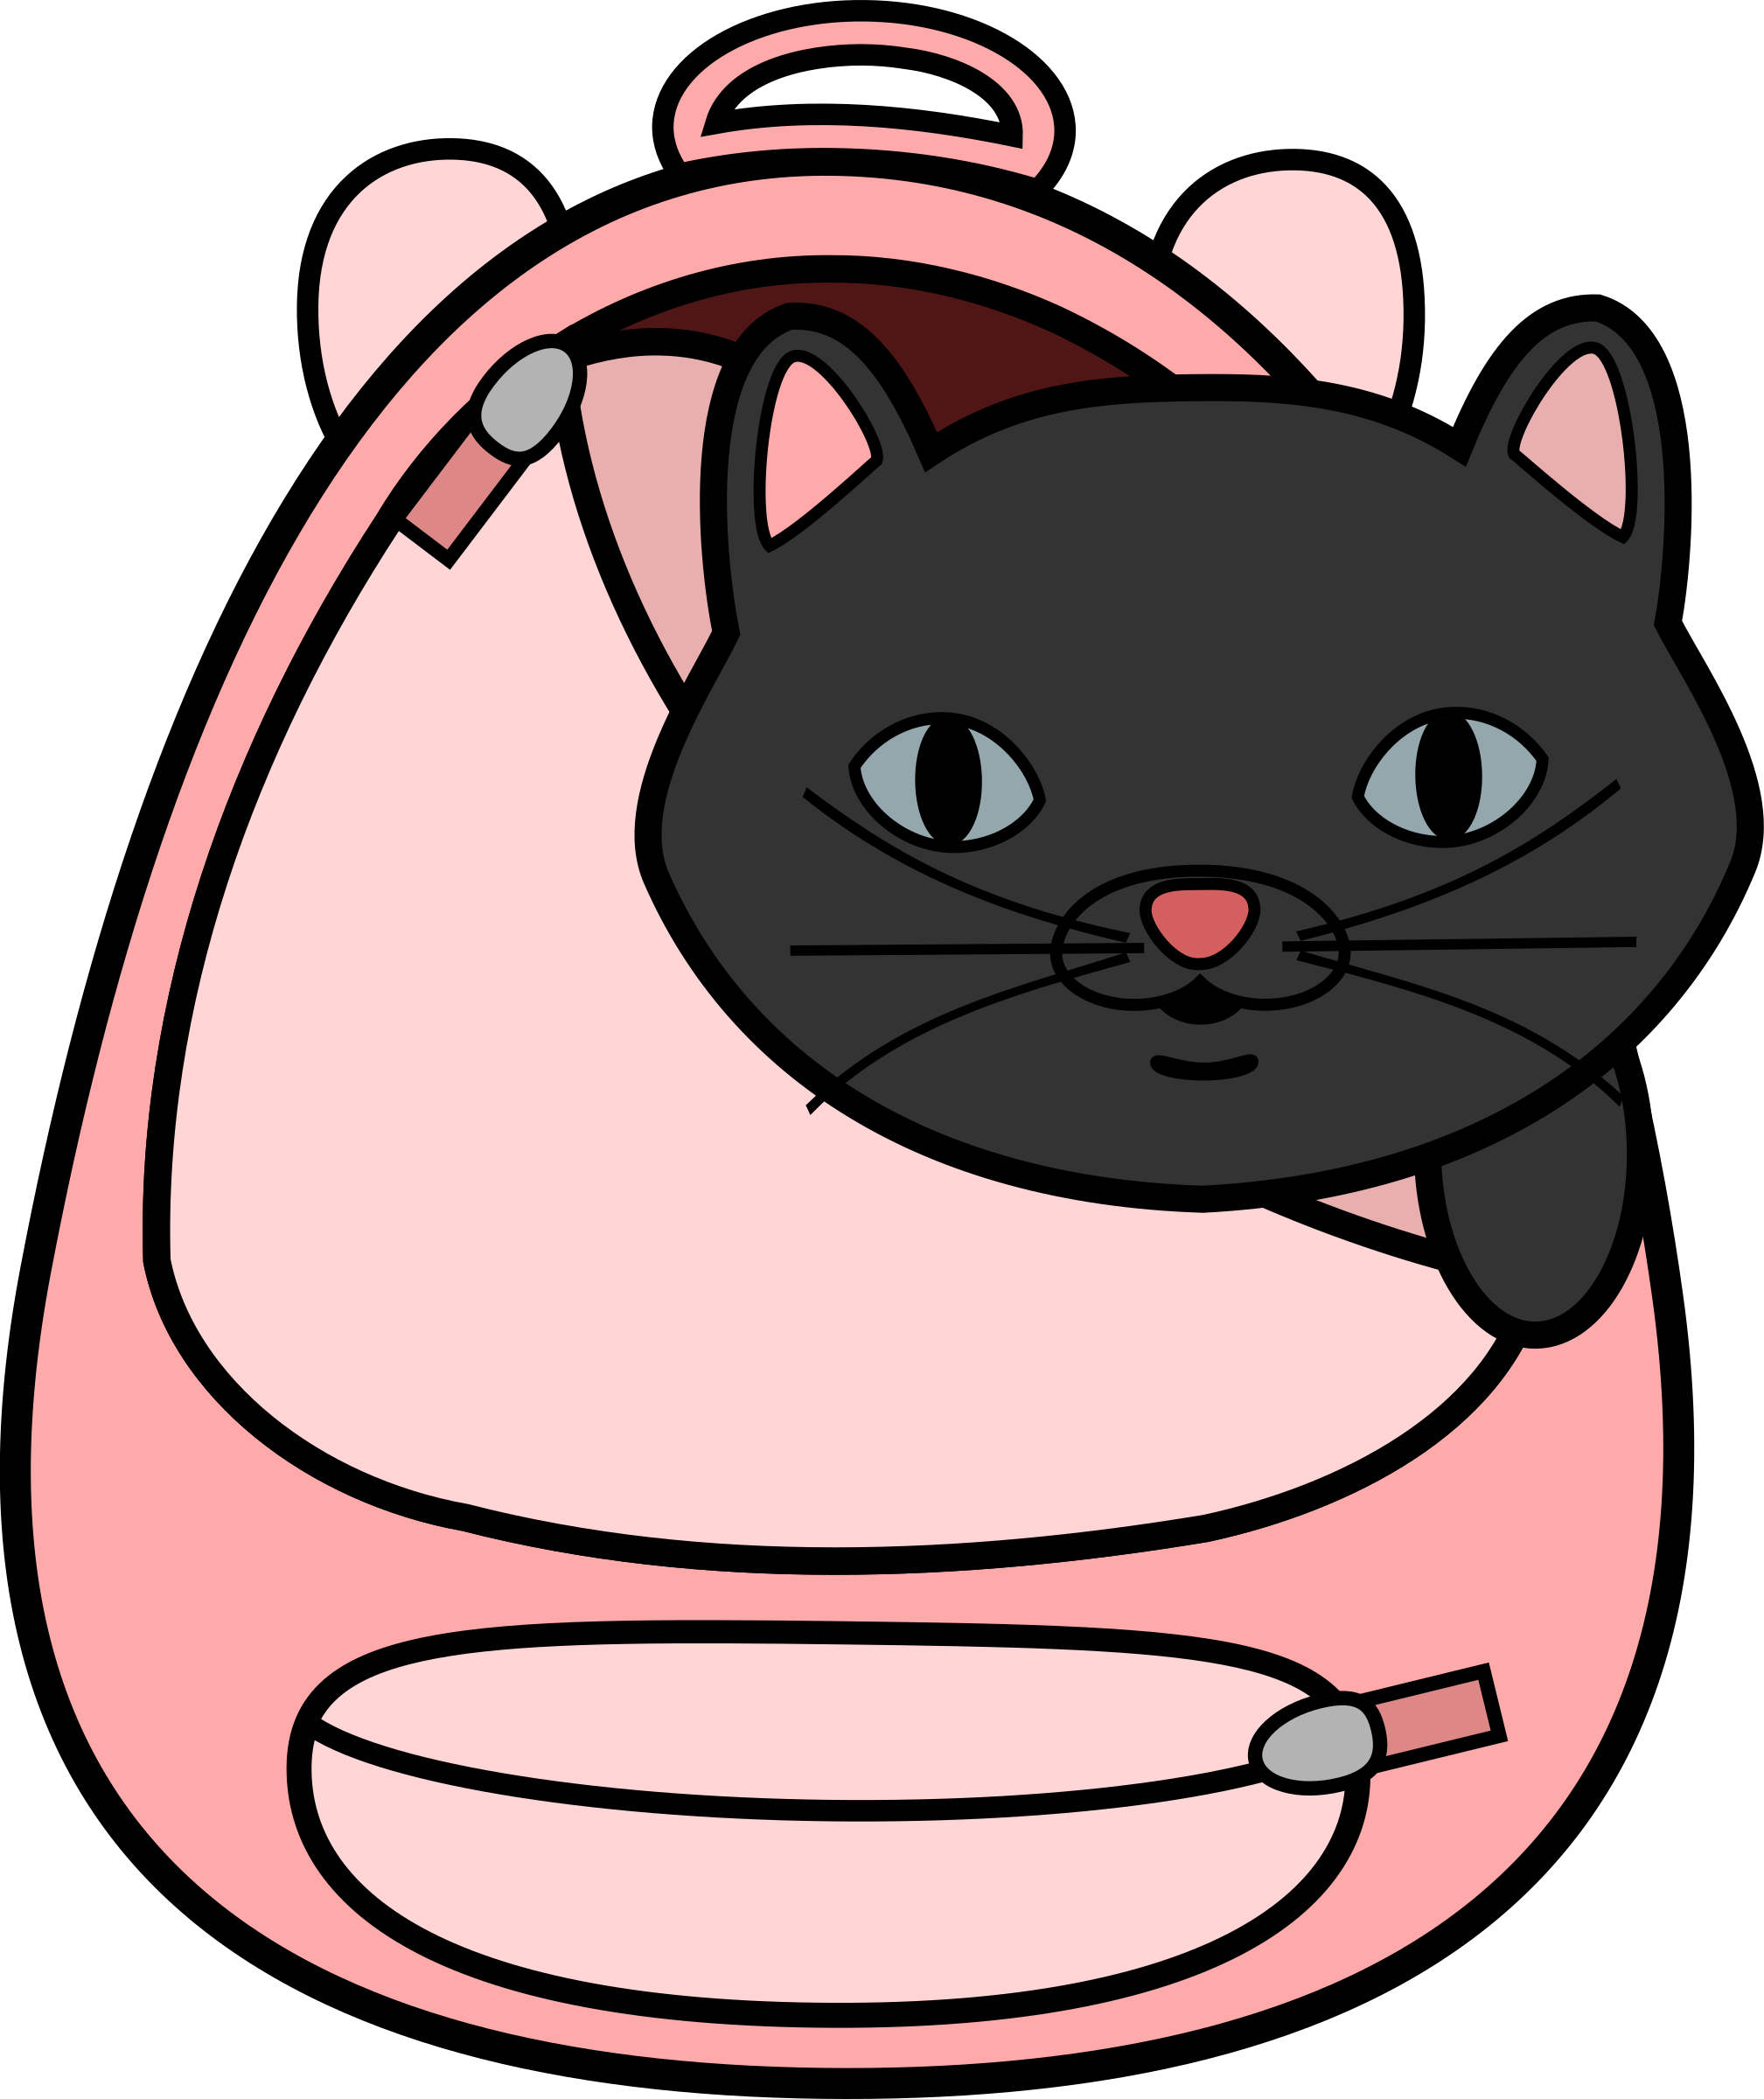 Cat in a bag. Wallet clipart animated